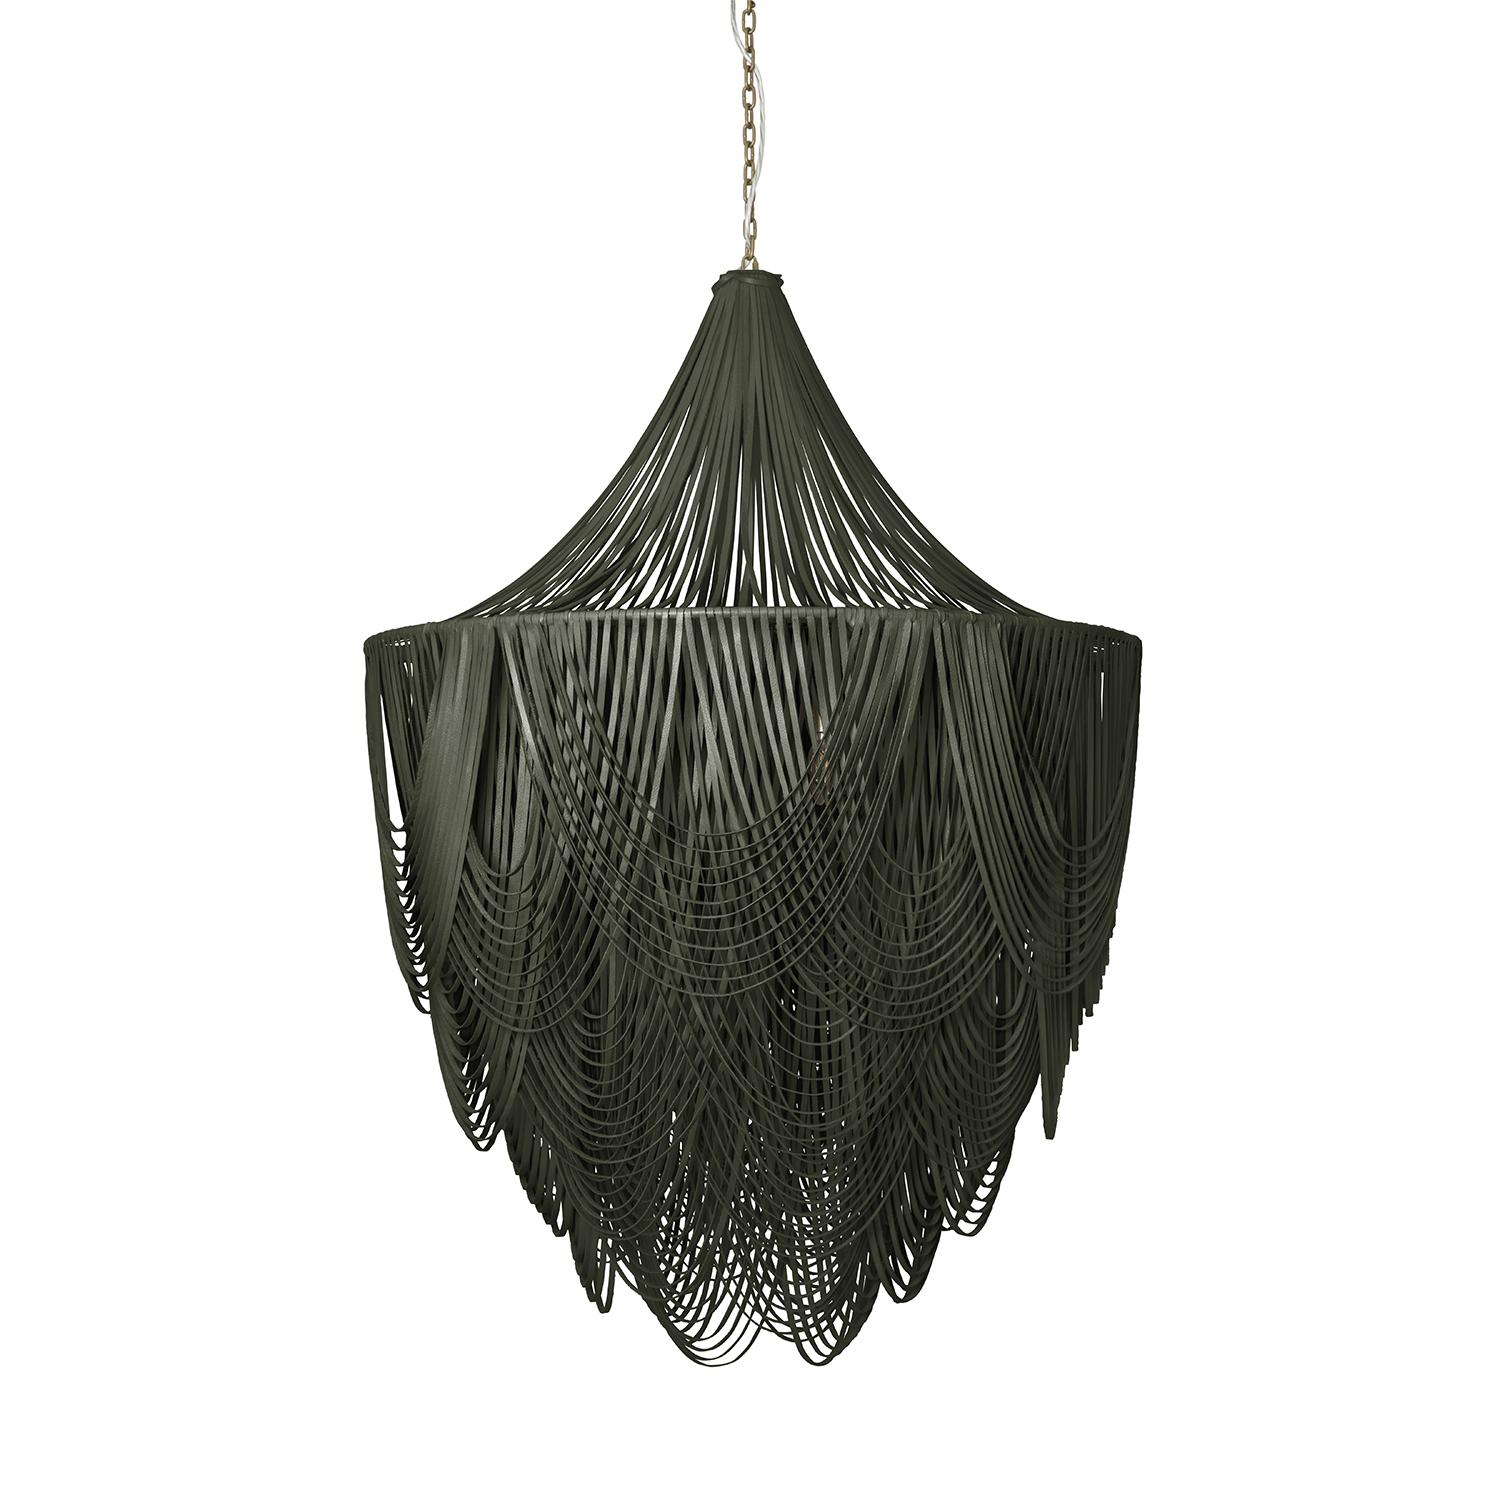 Whisper Chandelier w/ Crown - Extra Large - NeKeia Leather